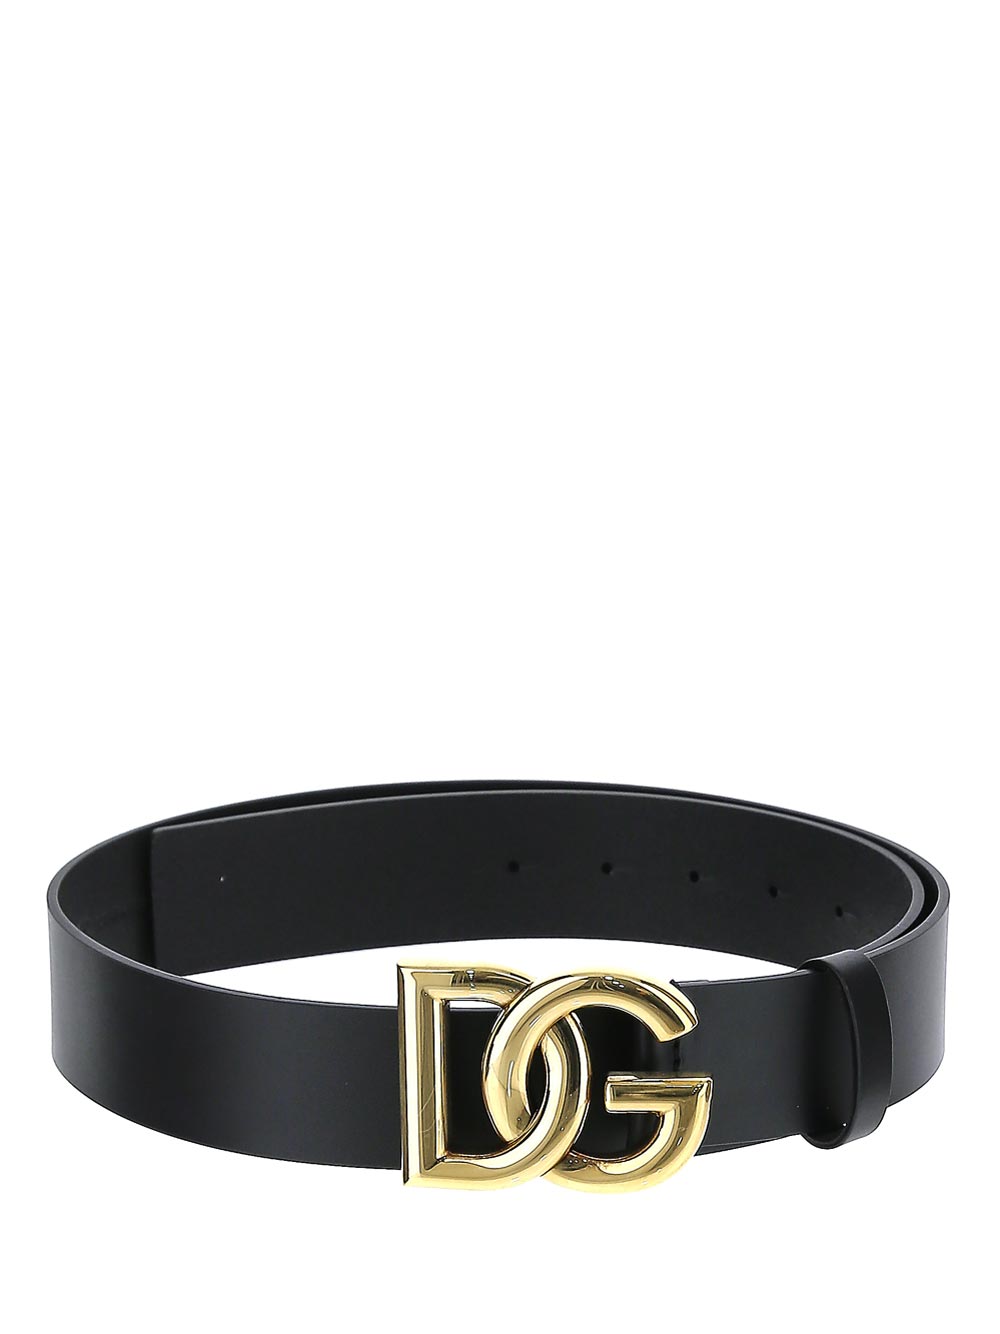 Dolce & Gabbana Lux leather belt featuring a new gold-plated crossover DG logo buckle.